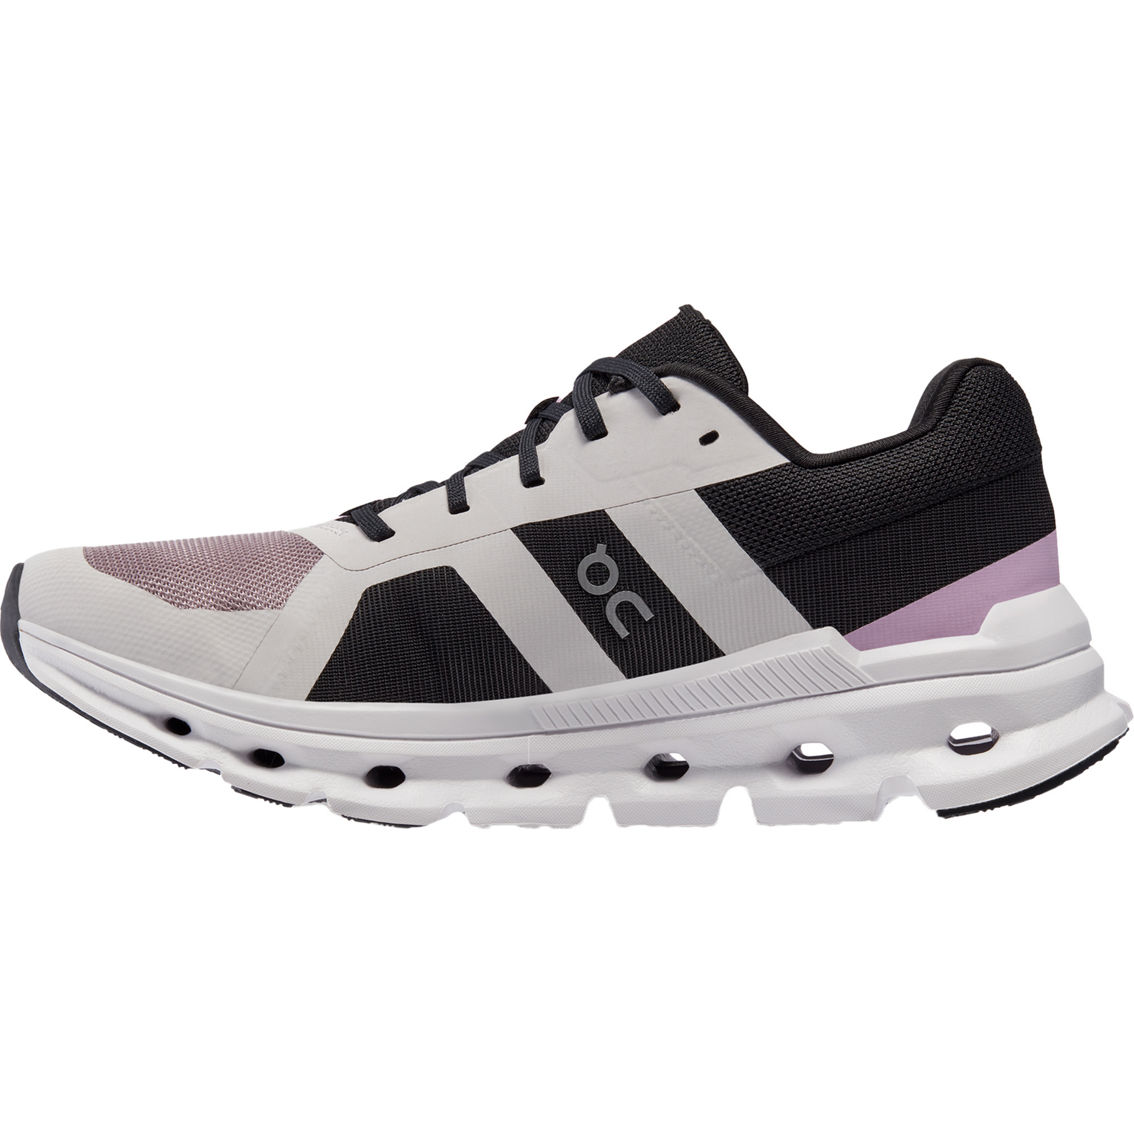 On Women's Cloudrunner Running Shoes - Image 3 of 6